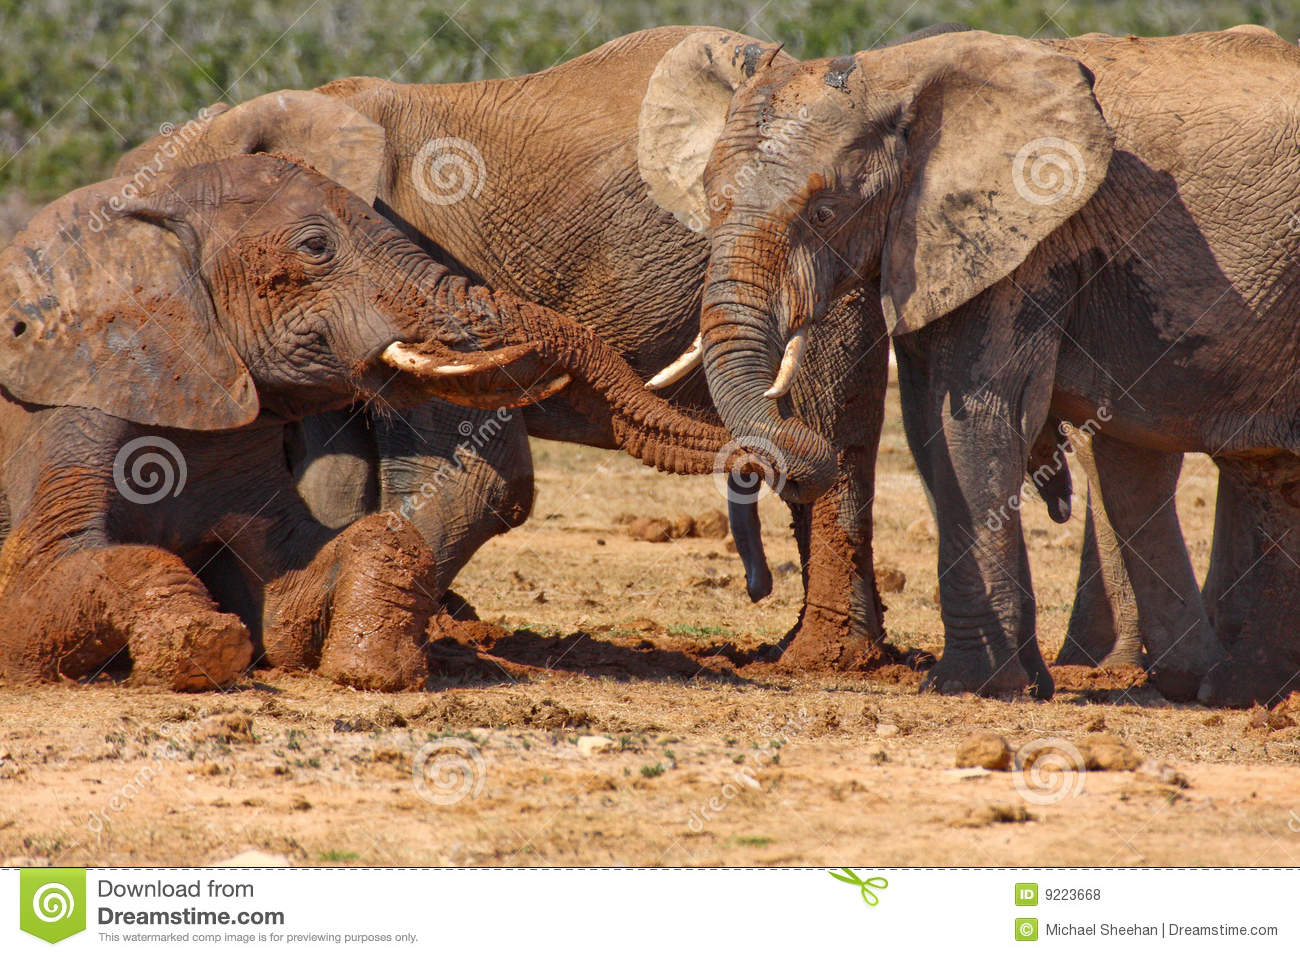 Elephant In A Mud Hole Royalty Free Stock Photos   Image  9223668